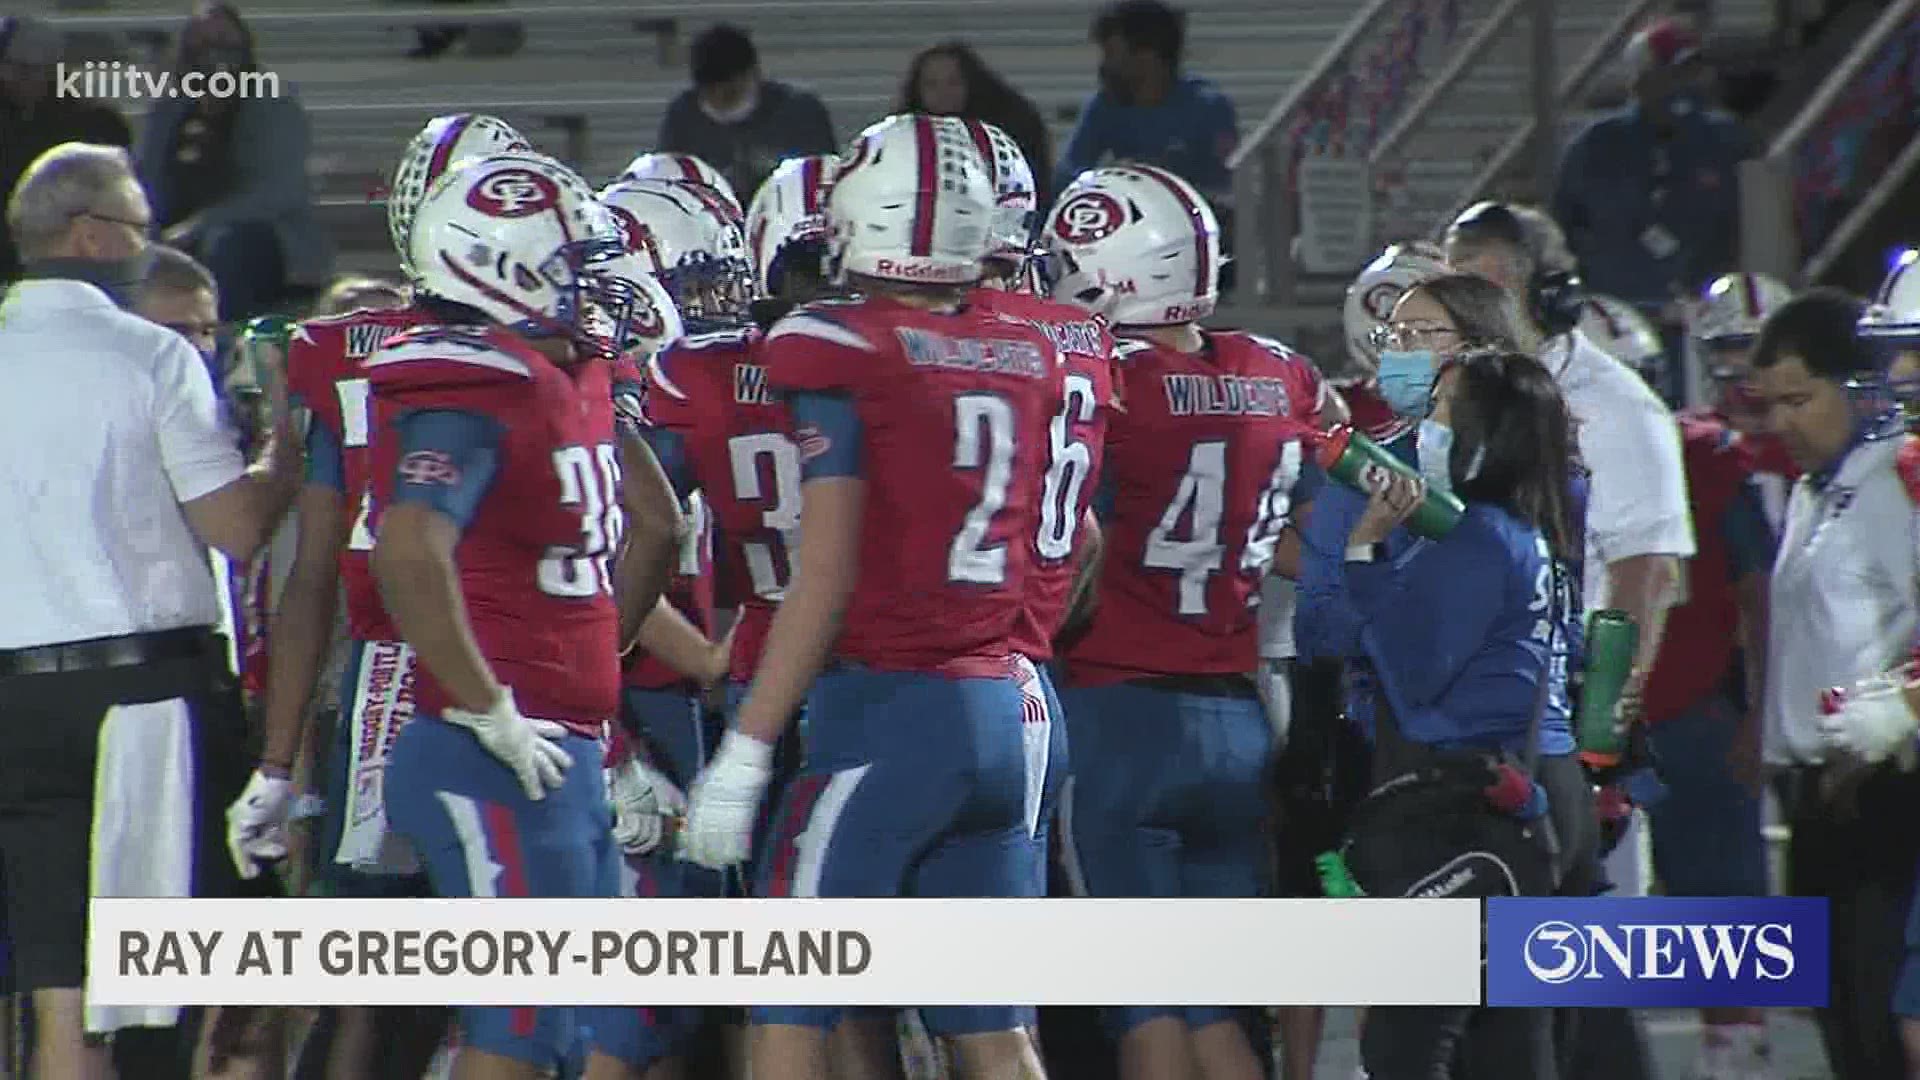 Gregory-Portland lead throughout in a 31-21 win over the Texans Wednesday night. G-P ends its season while Ray finishes with Veterans Memorial next week.